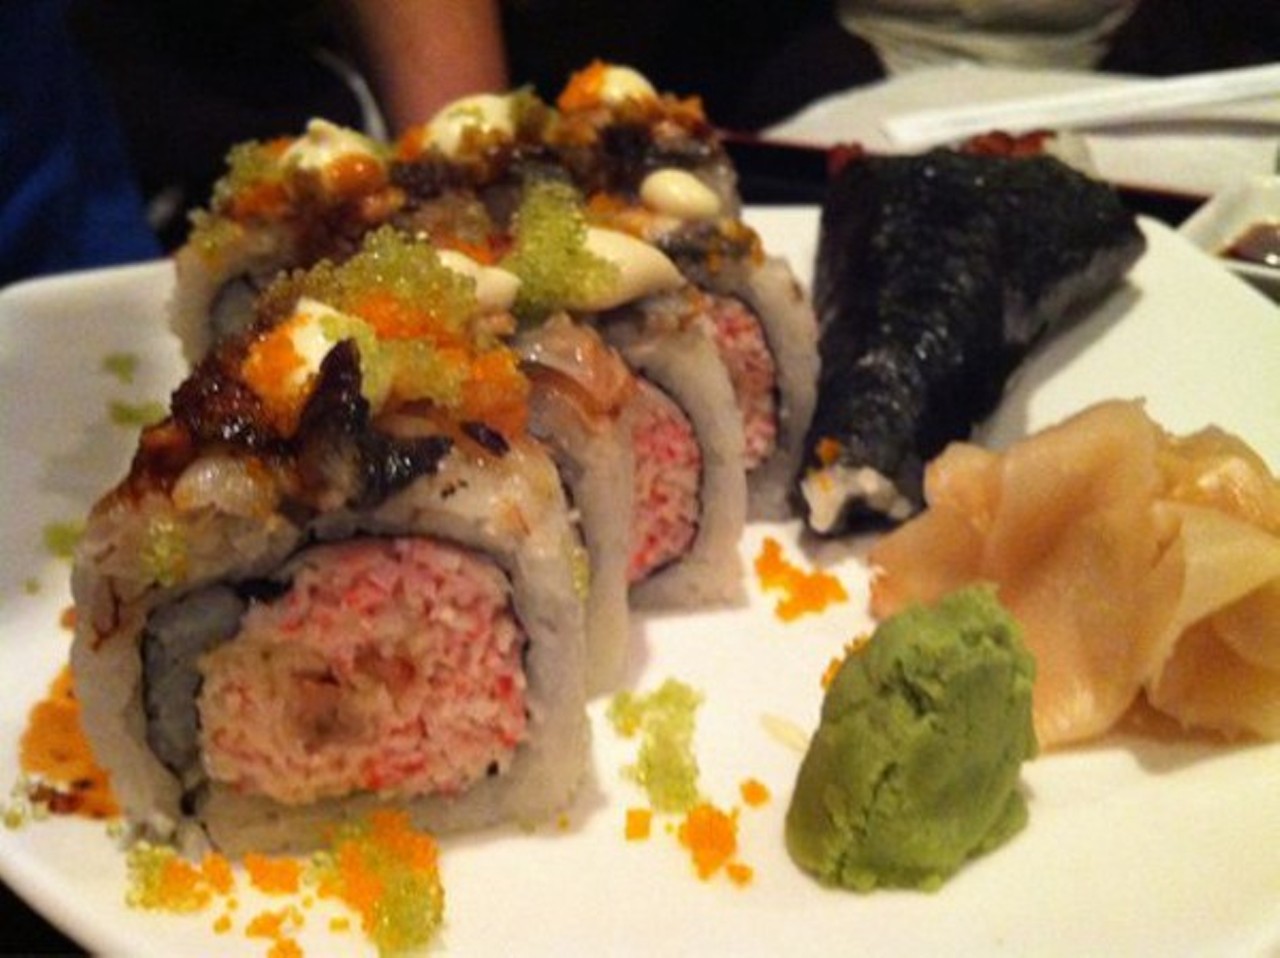 Shuhei  - Beachwood: This traditional Japanese sushi restaurant offers a vegan's dream roll. Their Vegetarian Hand Roll Heaven consists of a selection of five different hand rolls: all seasonal vegetables like peppers, Shitake mushrooms, Kaiware daikon, asparagus & green bean.